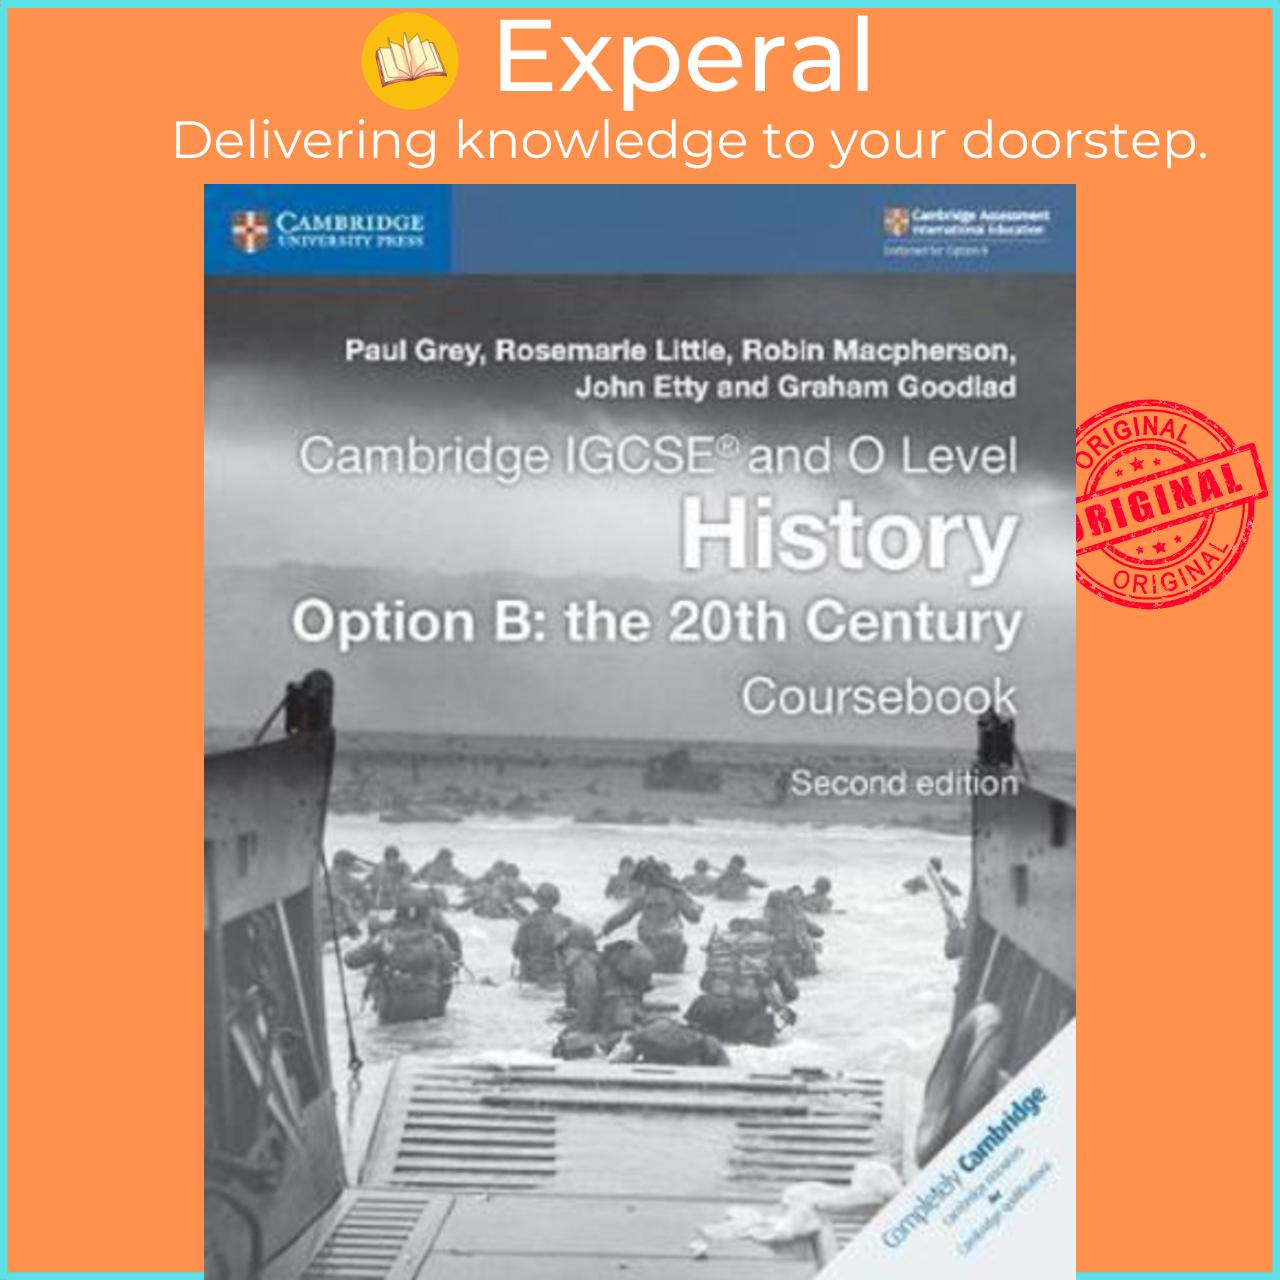 Sách - Cambridge IGCSE (R) and O Level History Option B: the 20th Century Courseboo by Paul Grey (UK edition, paperback)